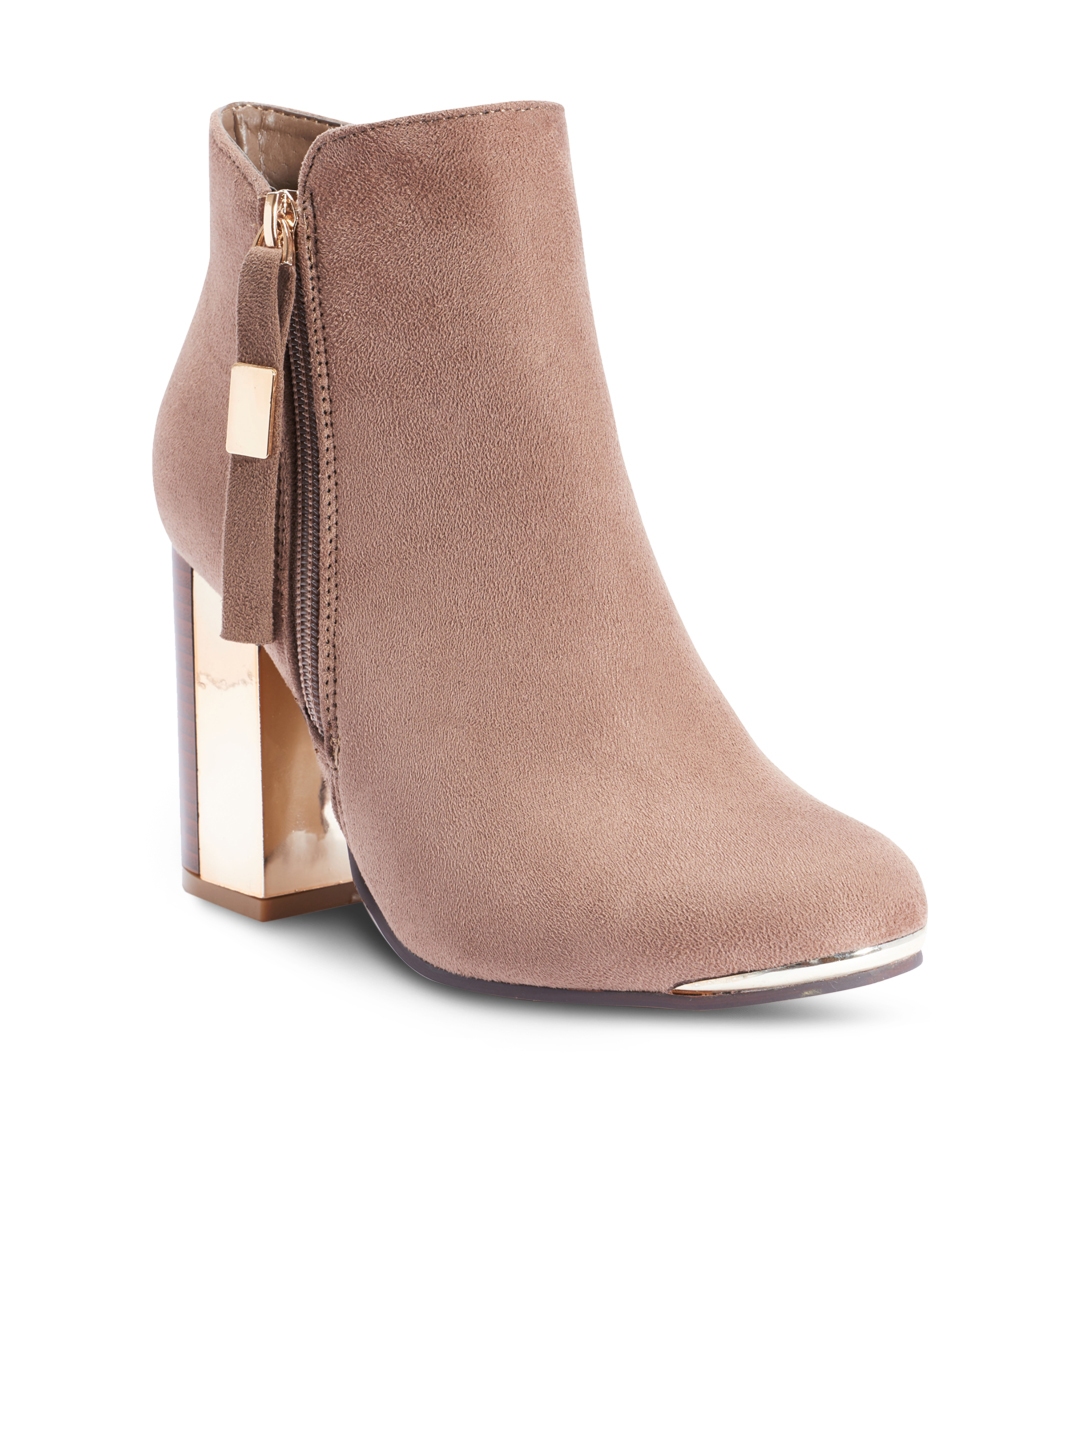 Women Taupe Solid Heeled Boots - Heels 